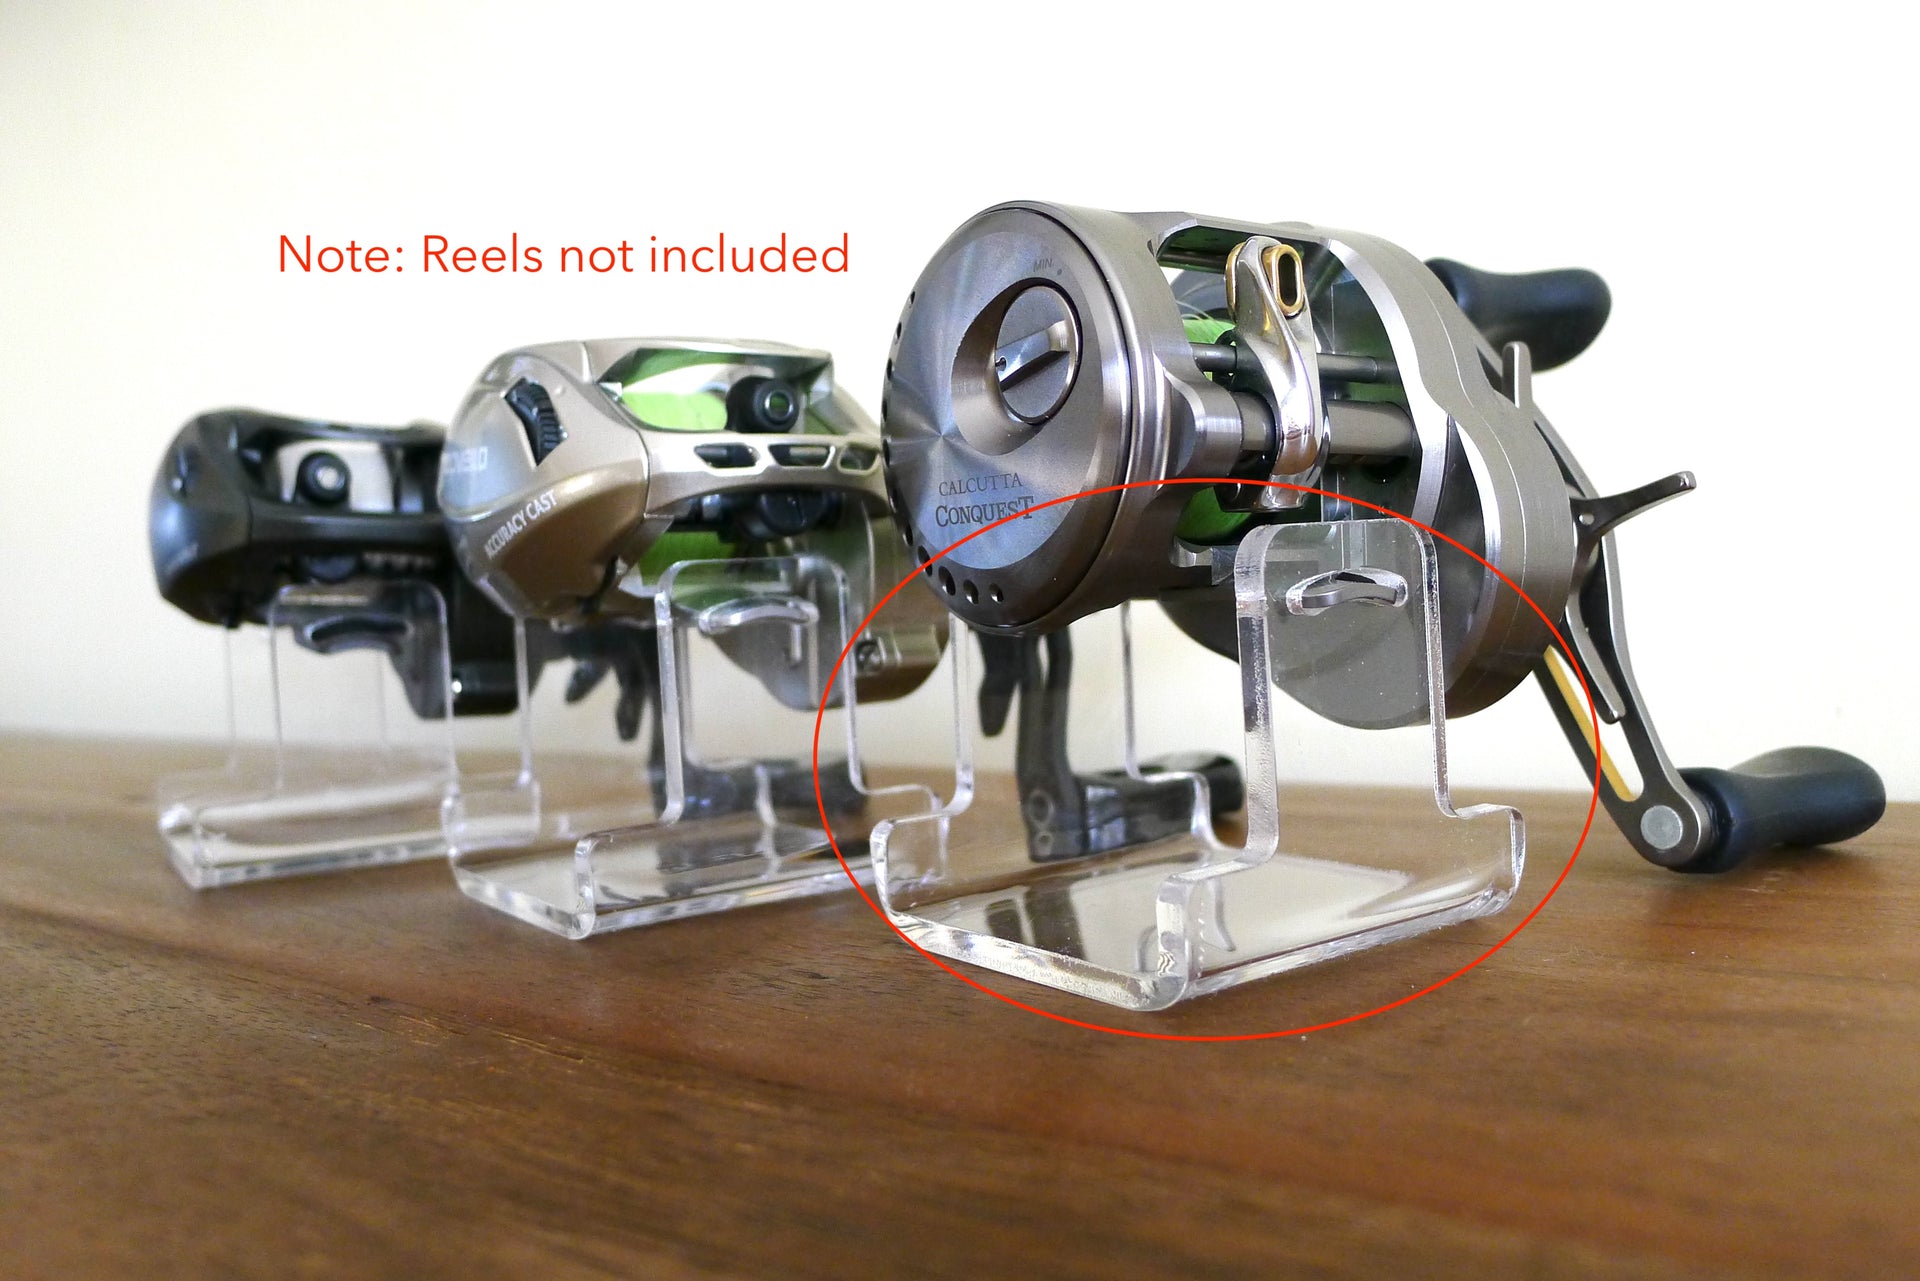 Reel Stand